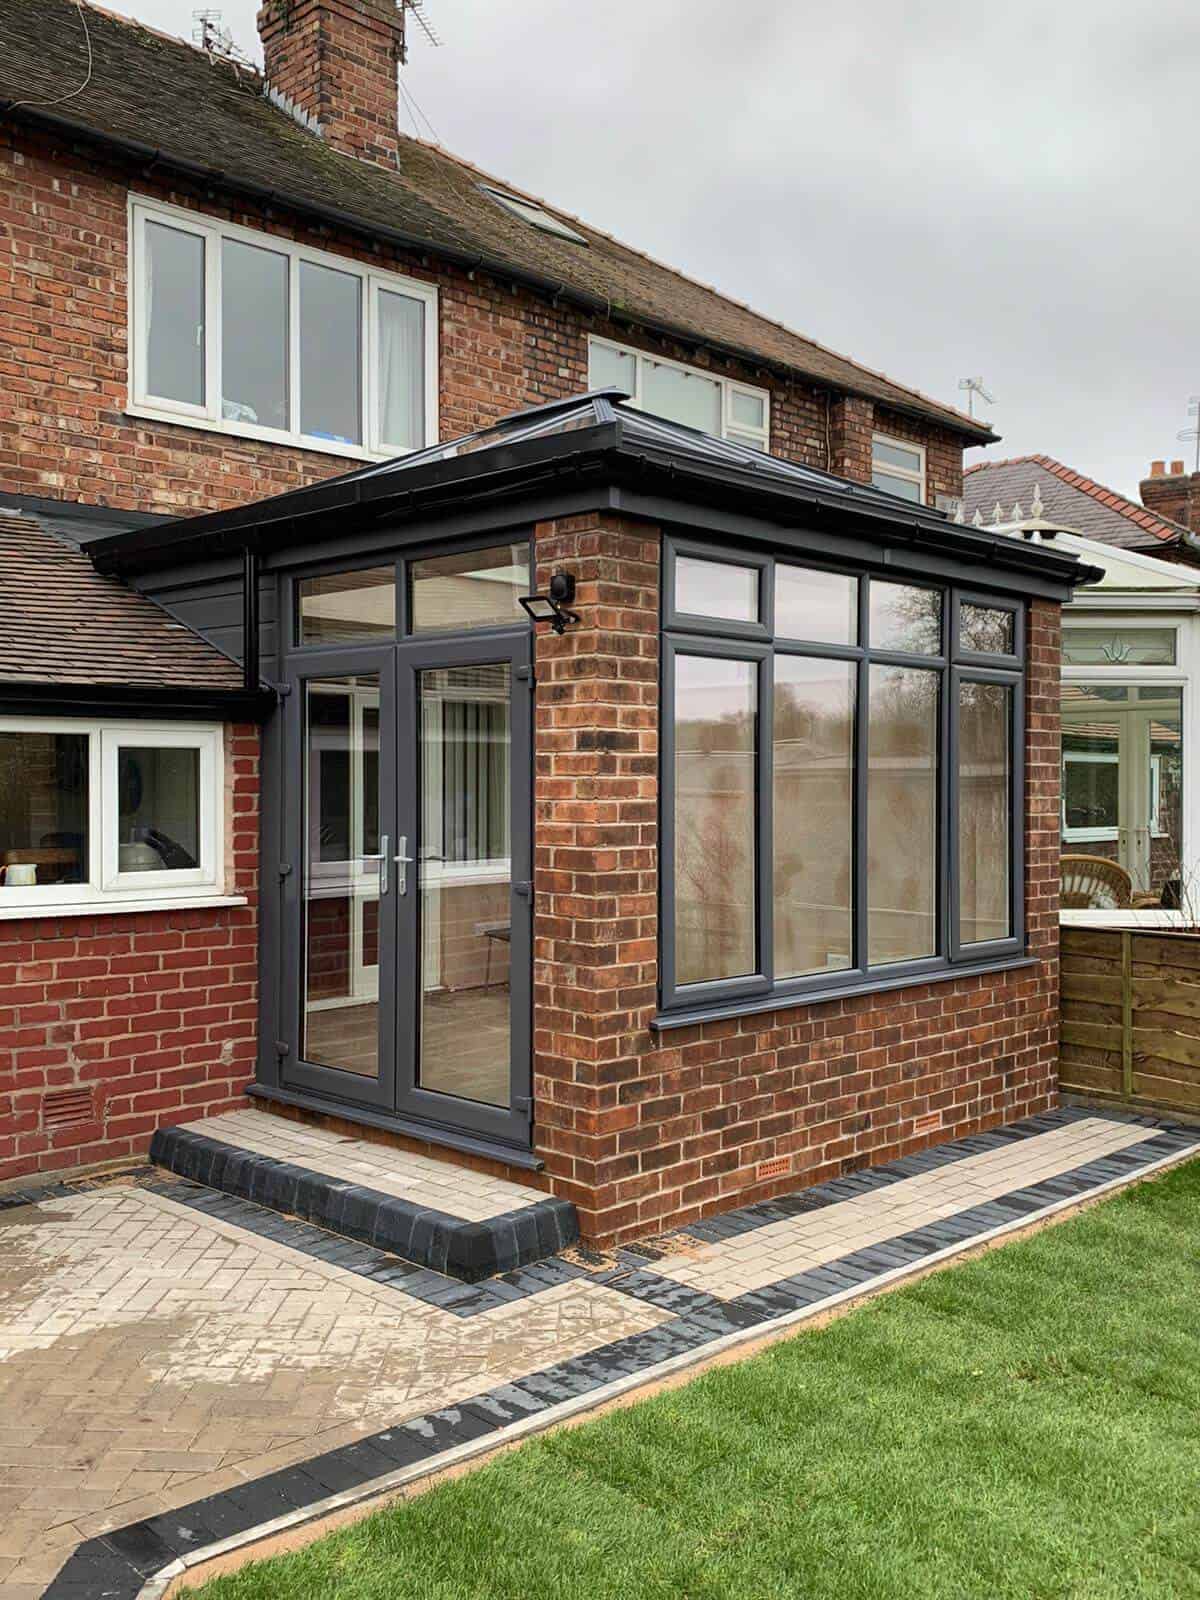 uPVC vs timber orangeries: what are the differences? - Reddish Joinery